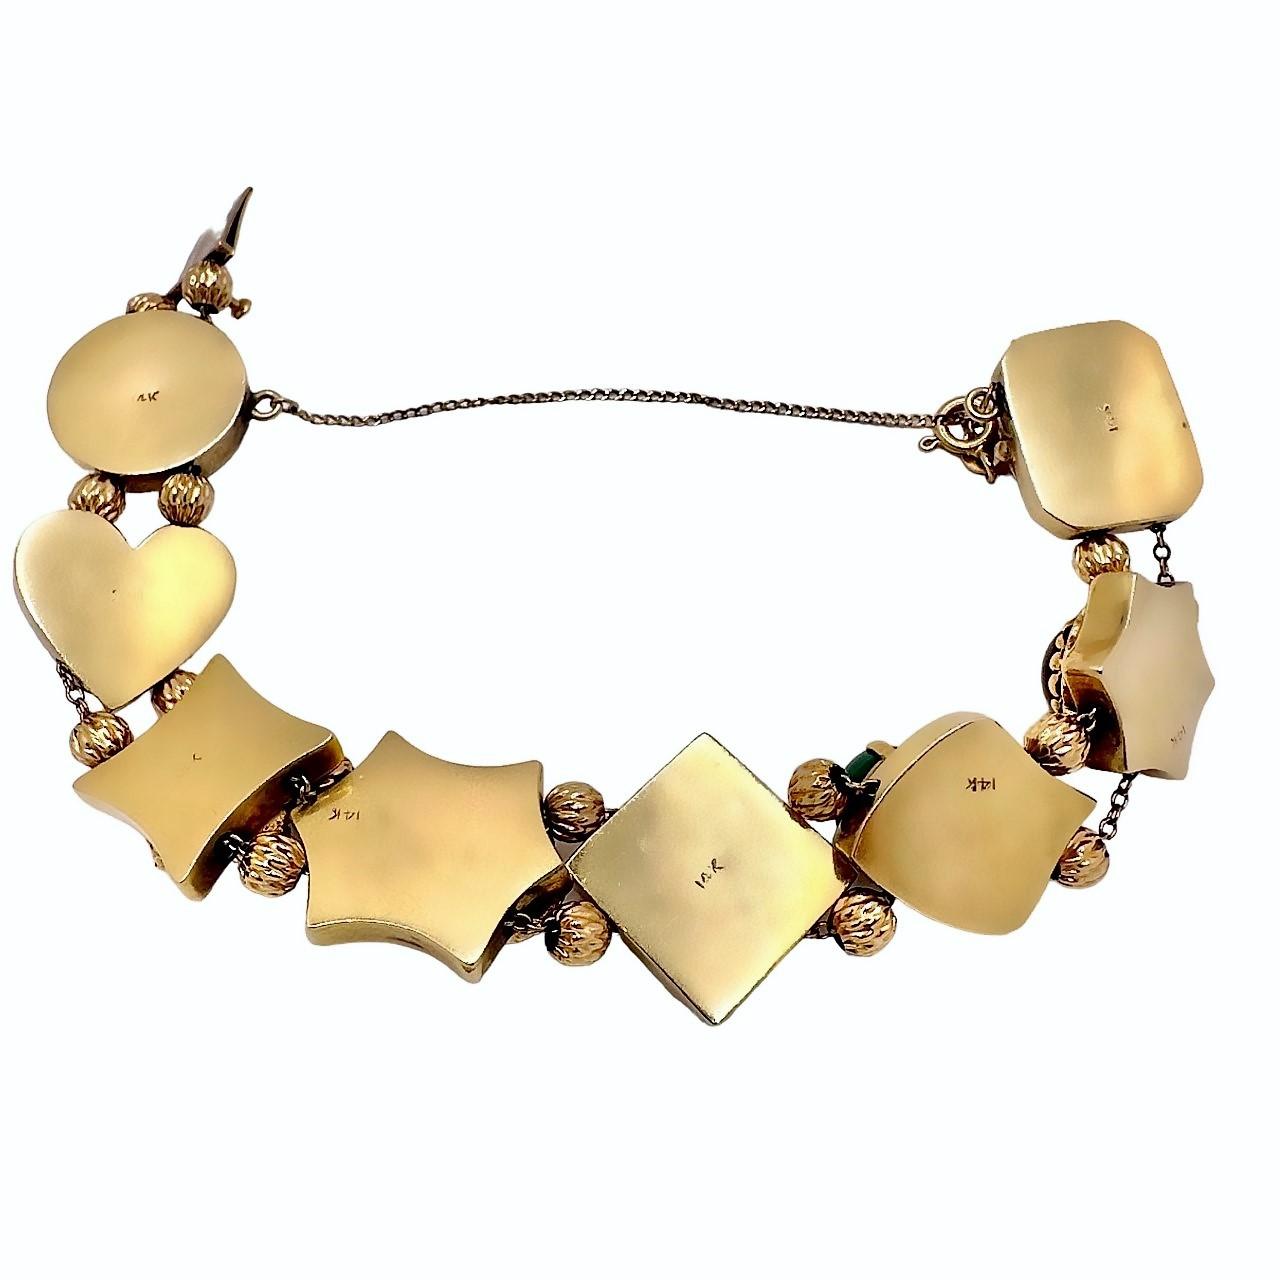 This Mid-20th century slide bracelet is from a genre of similar pieces, all derived and created as a tribute to slides which were primarily used in Victorian period ladies necklaces. It is crafted from 14k gold and is liberally set with assorted